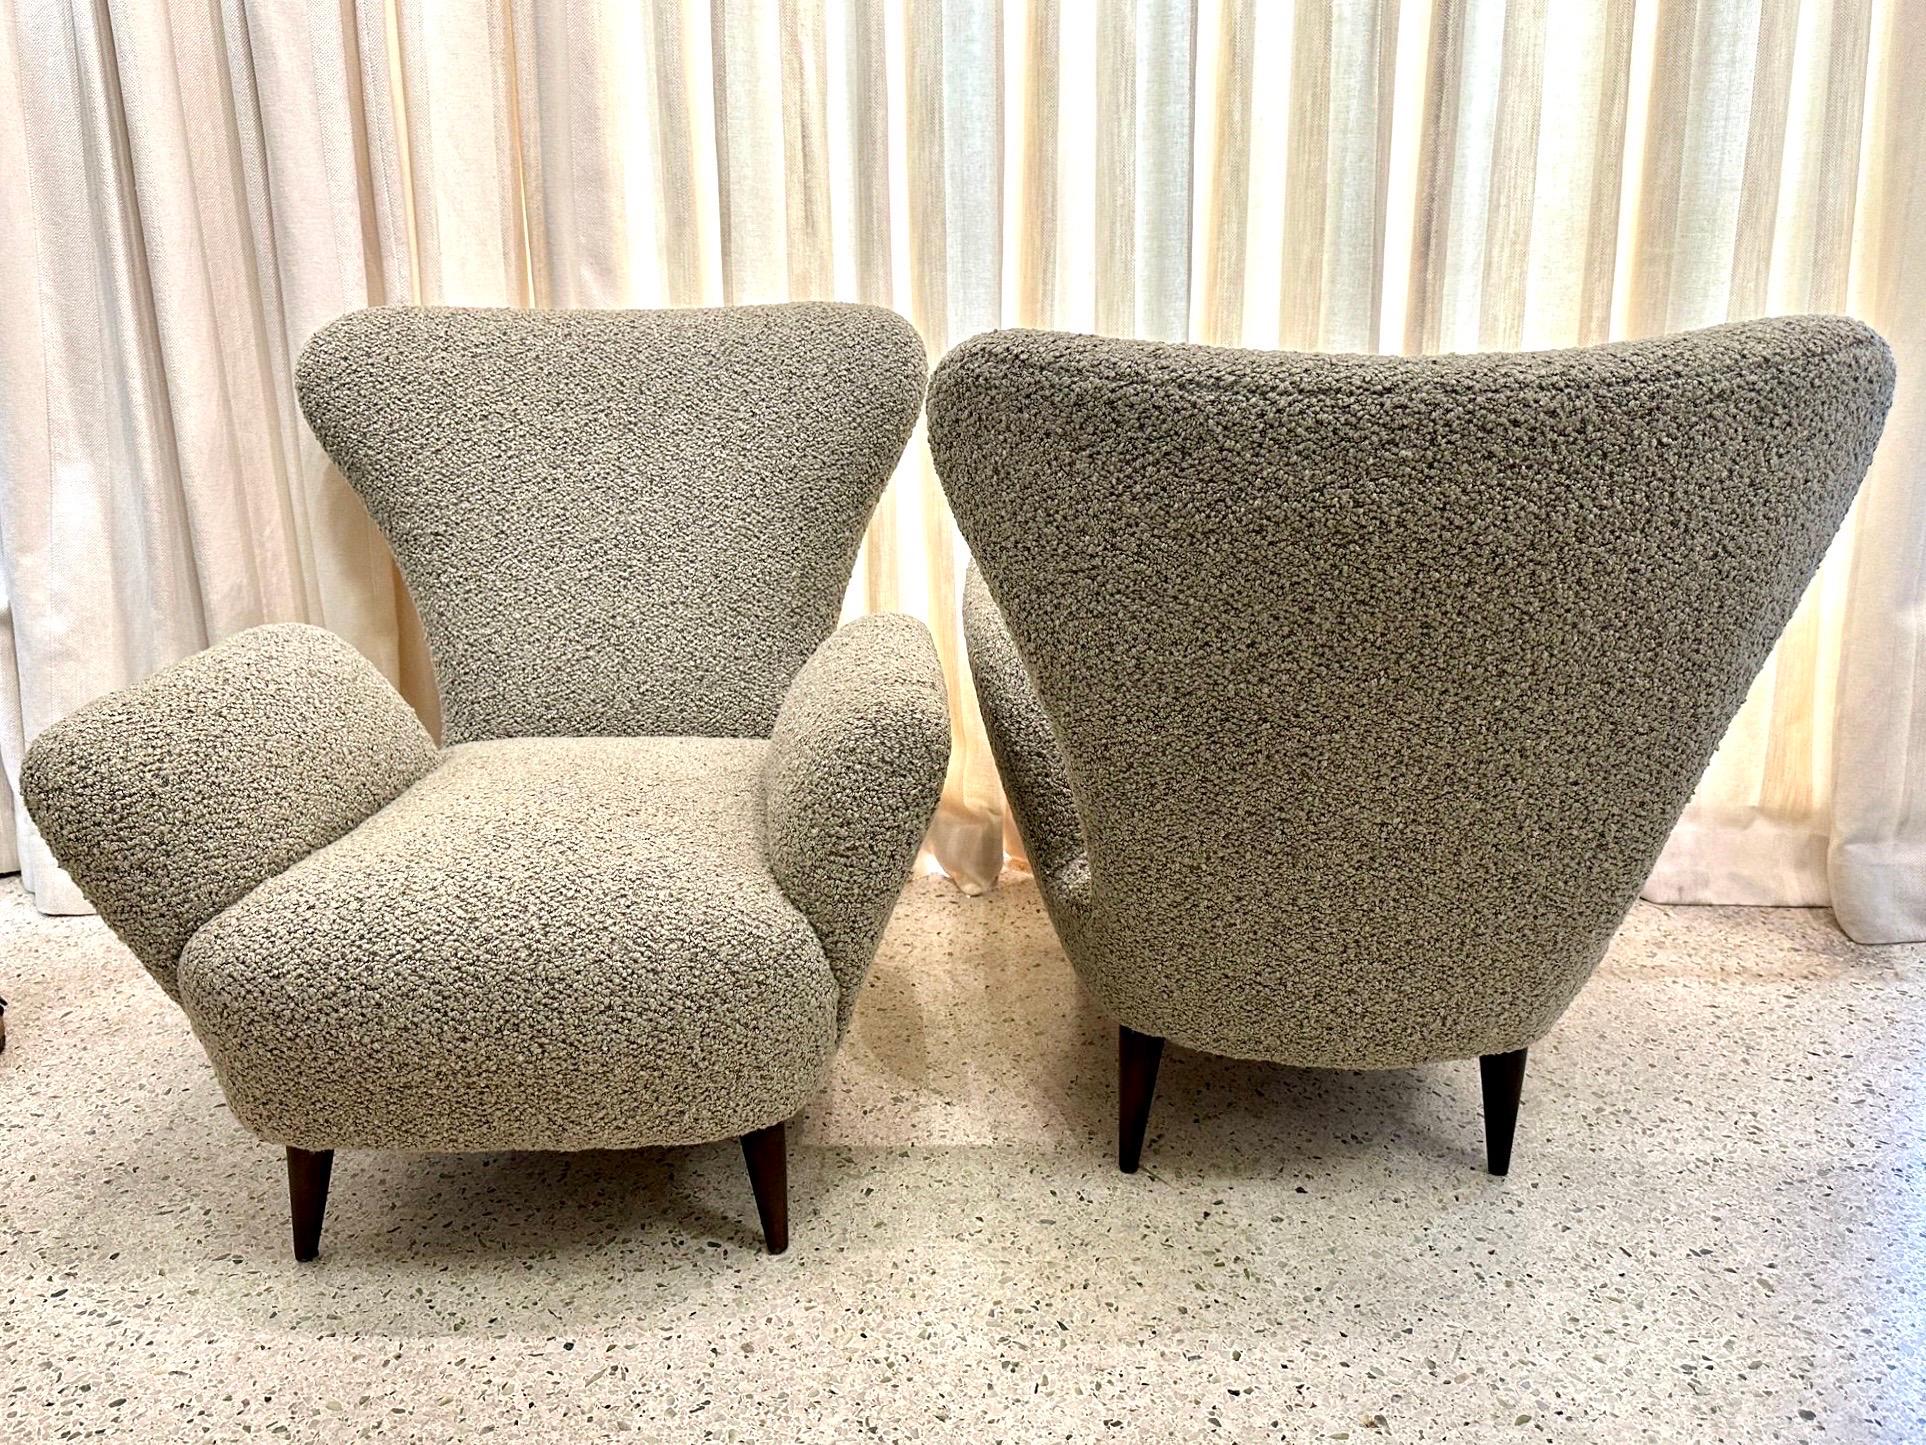 Emilio Sala & Giorgio Madini Pair of Vintage Italian Low Armchairs In Good Condition For Sale In East Hampton, NY